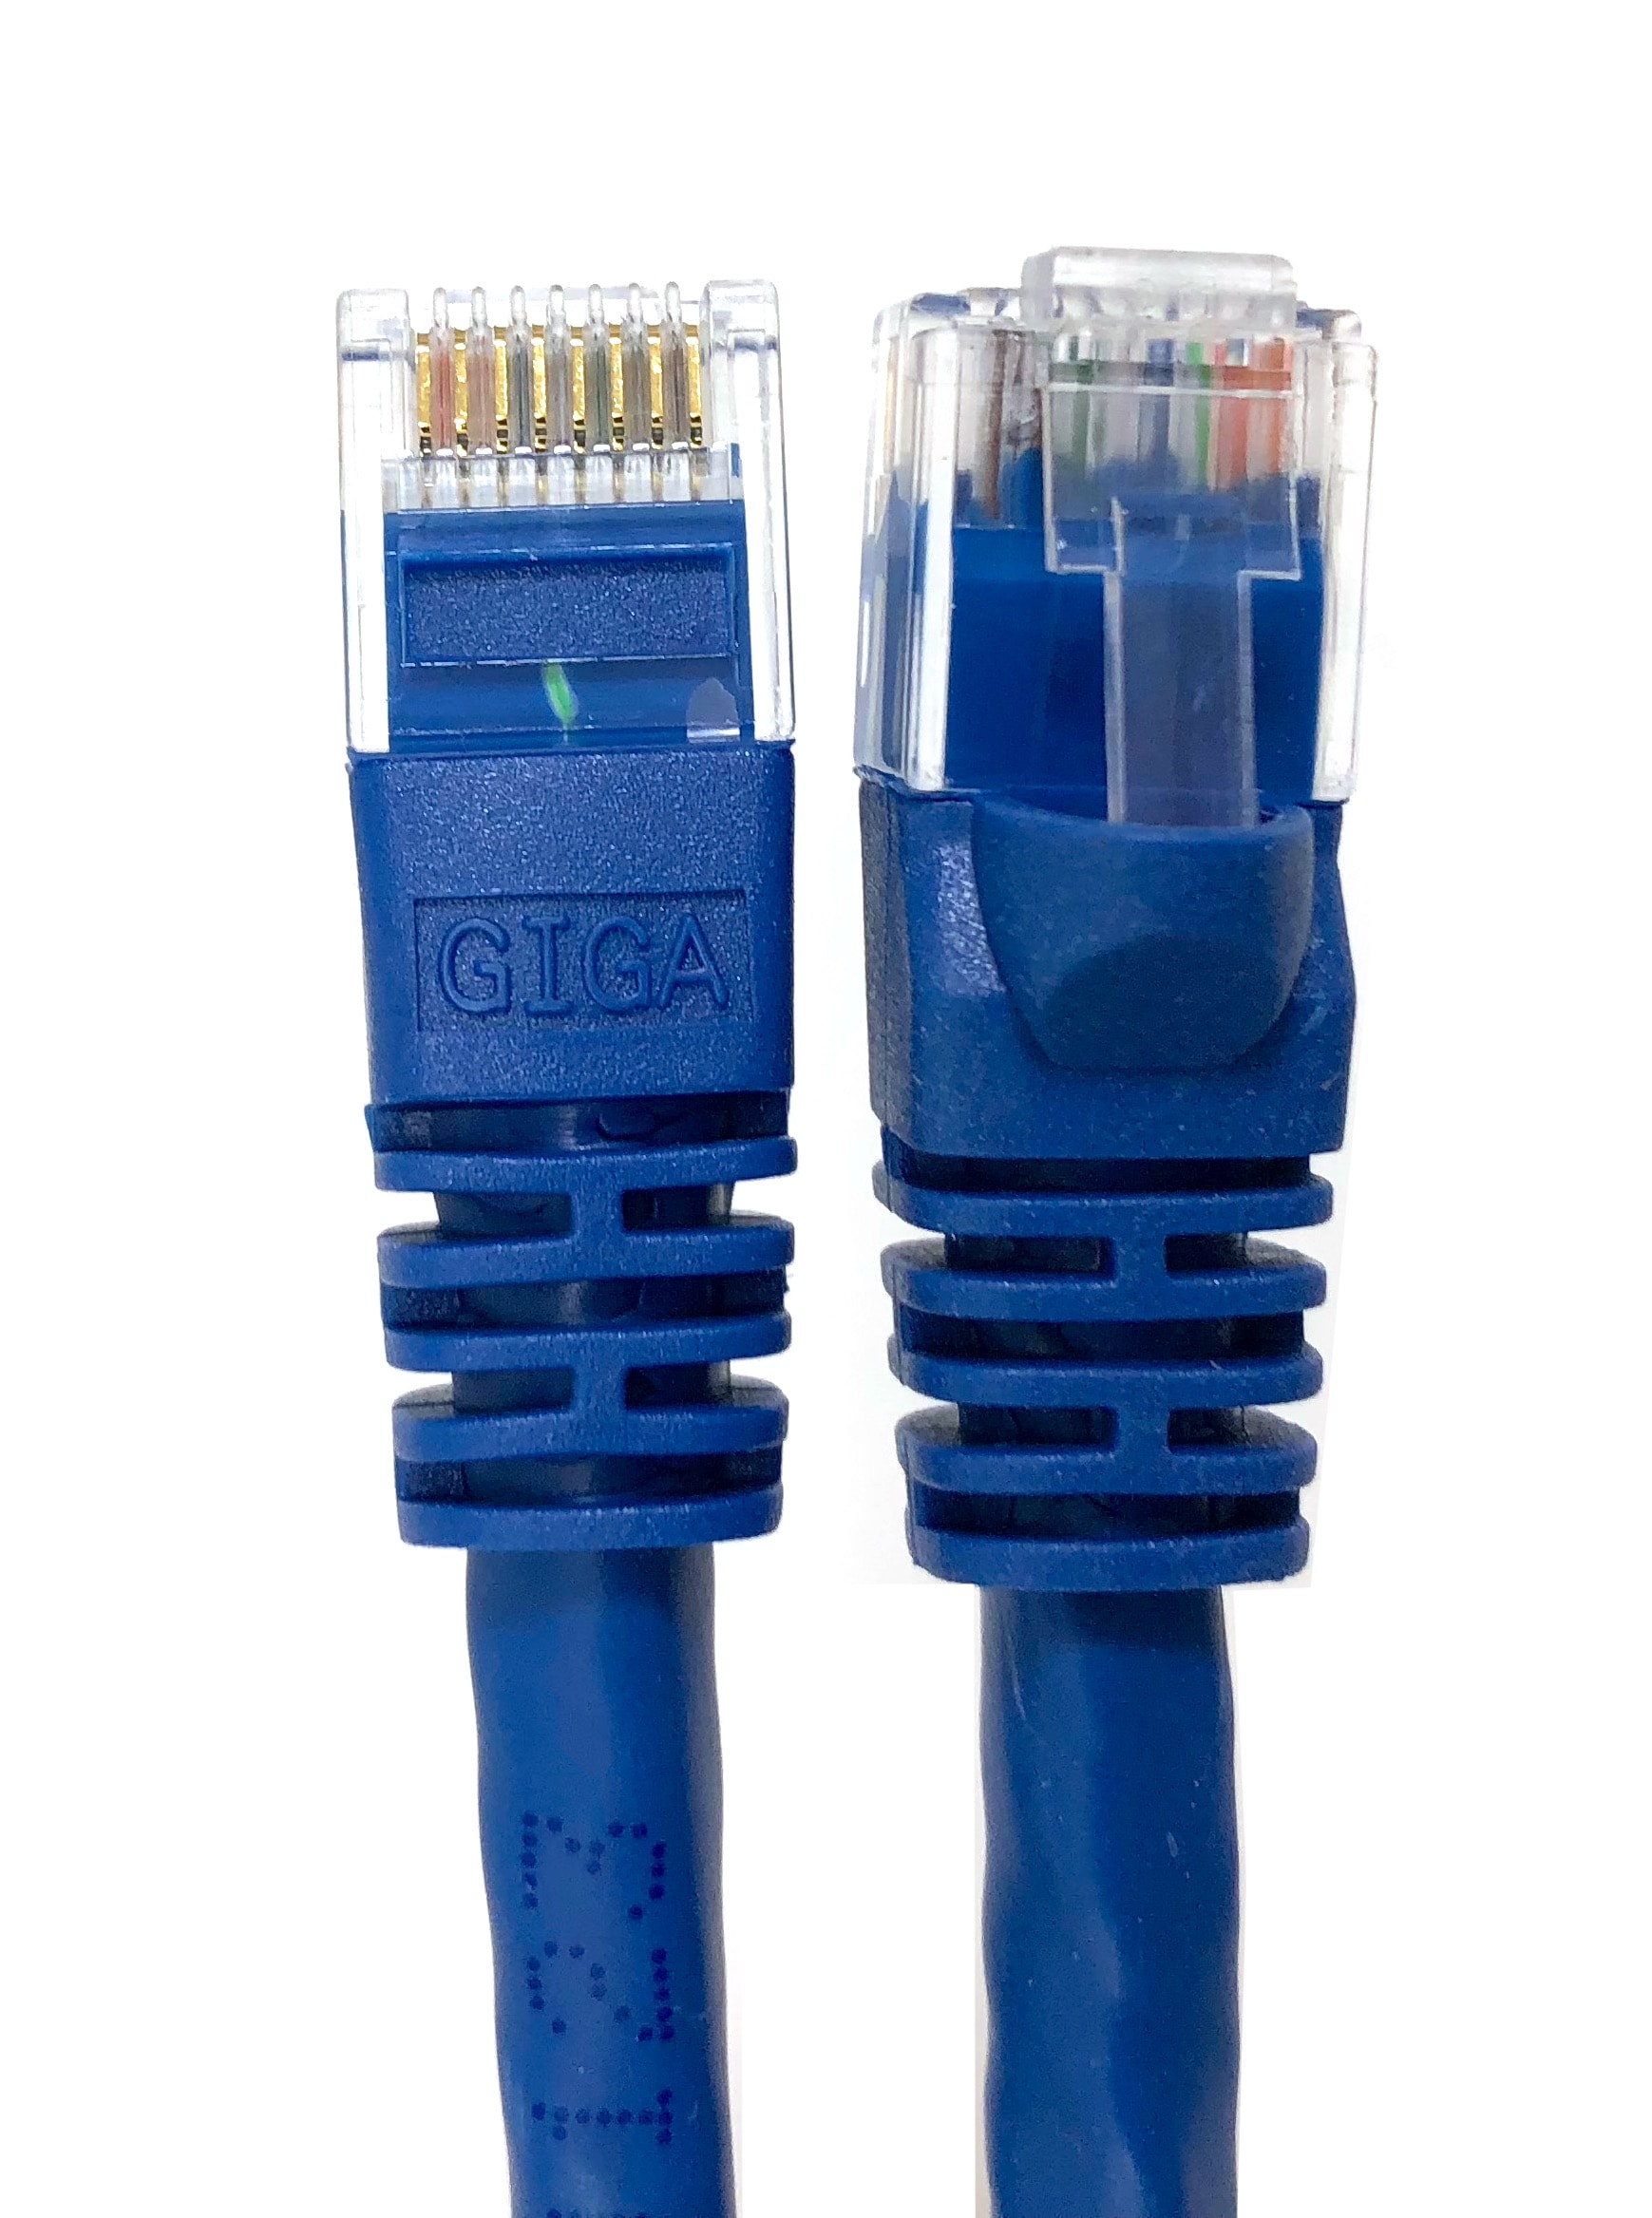 Cat 7 Ethernet Cable 40ft,High Speed Network Cable LAN Cable Wires.  Internet Network Computer Patch Cord.for PS5